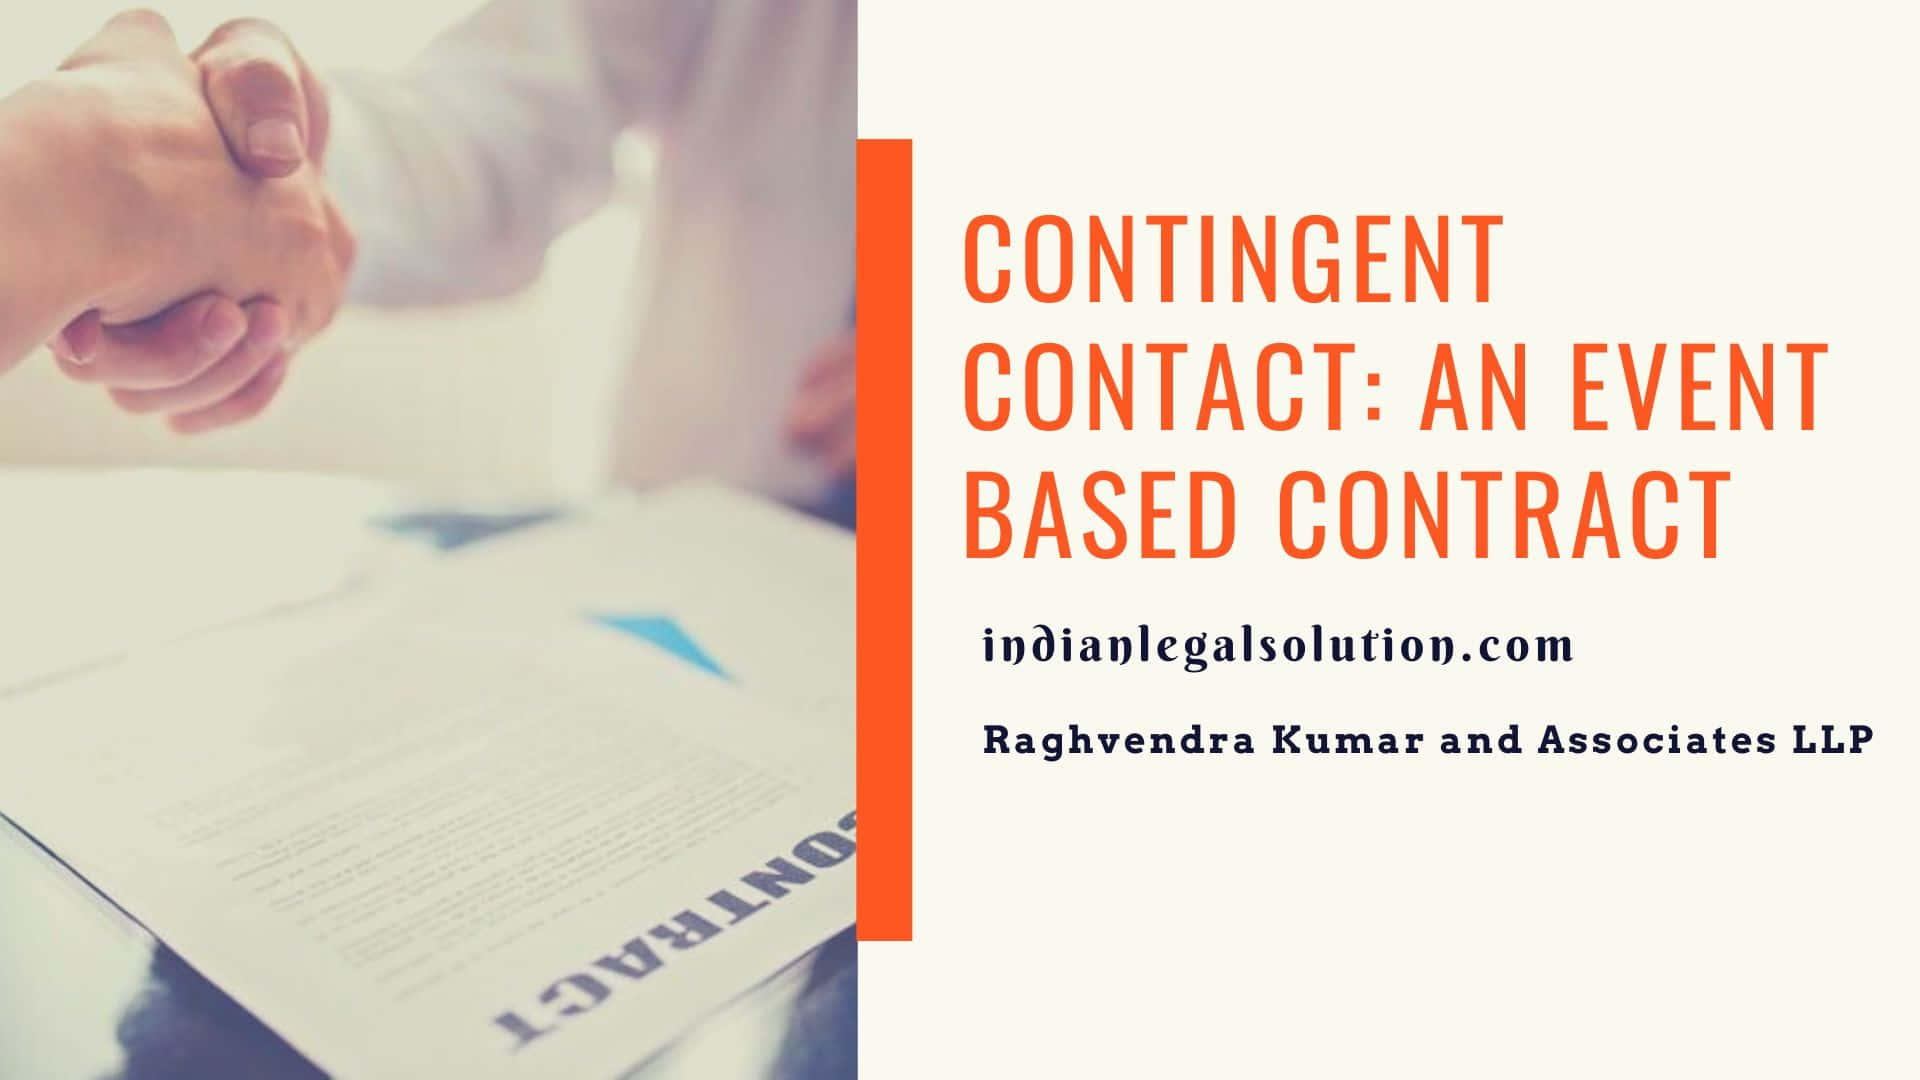 Contingent Contact Poster